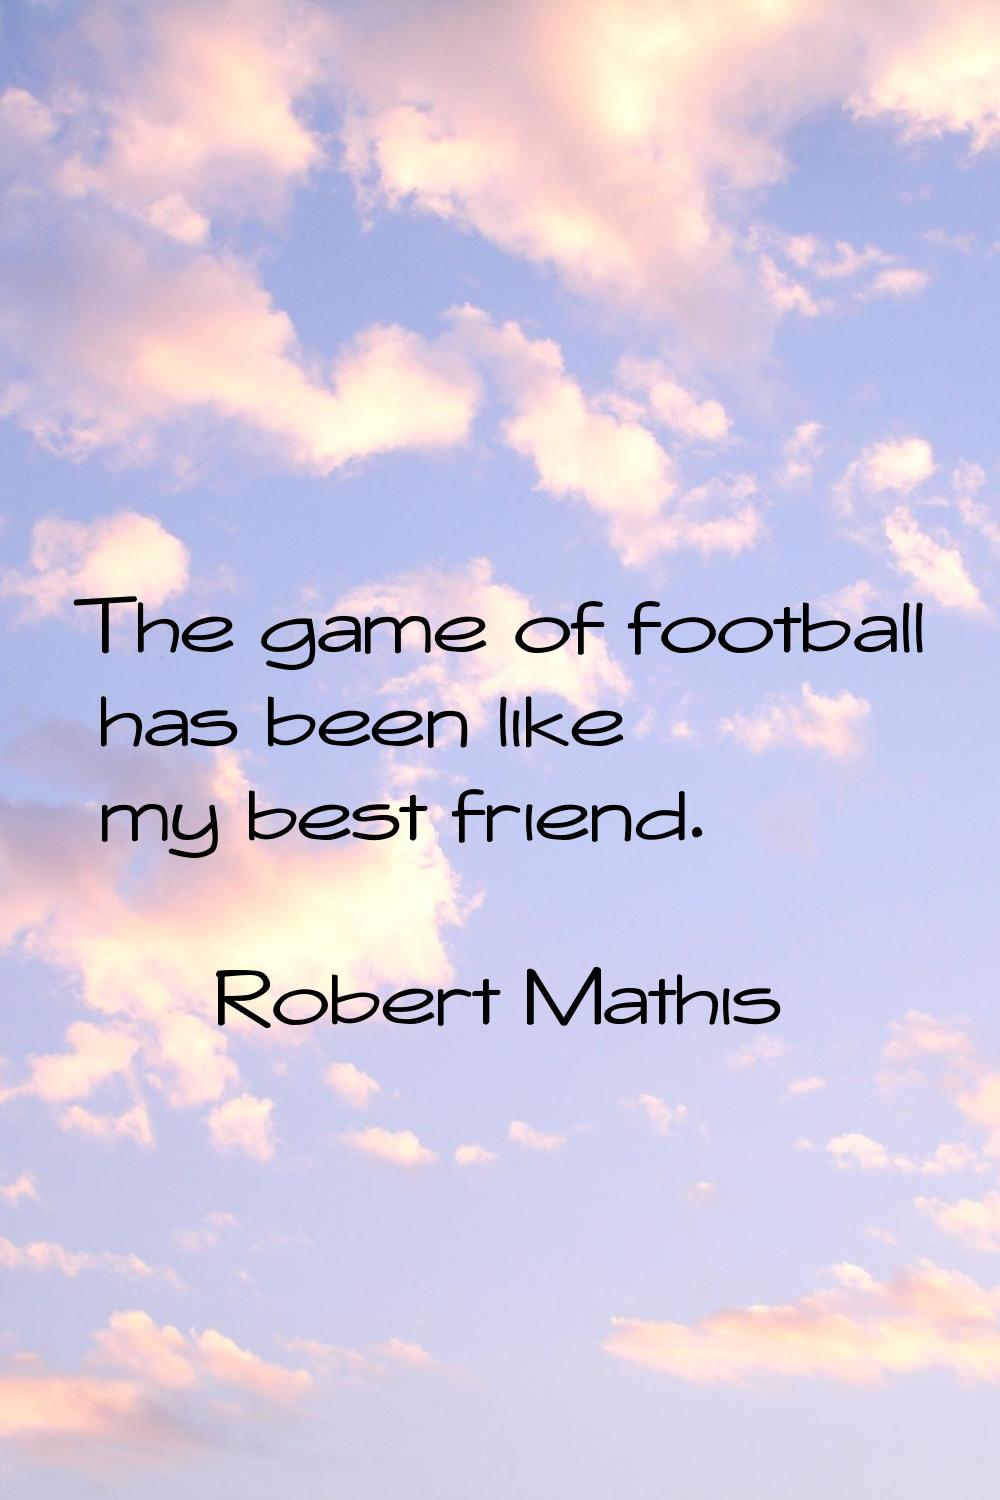 The game of football has been like my best friend.